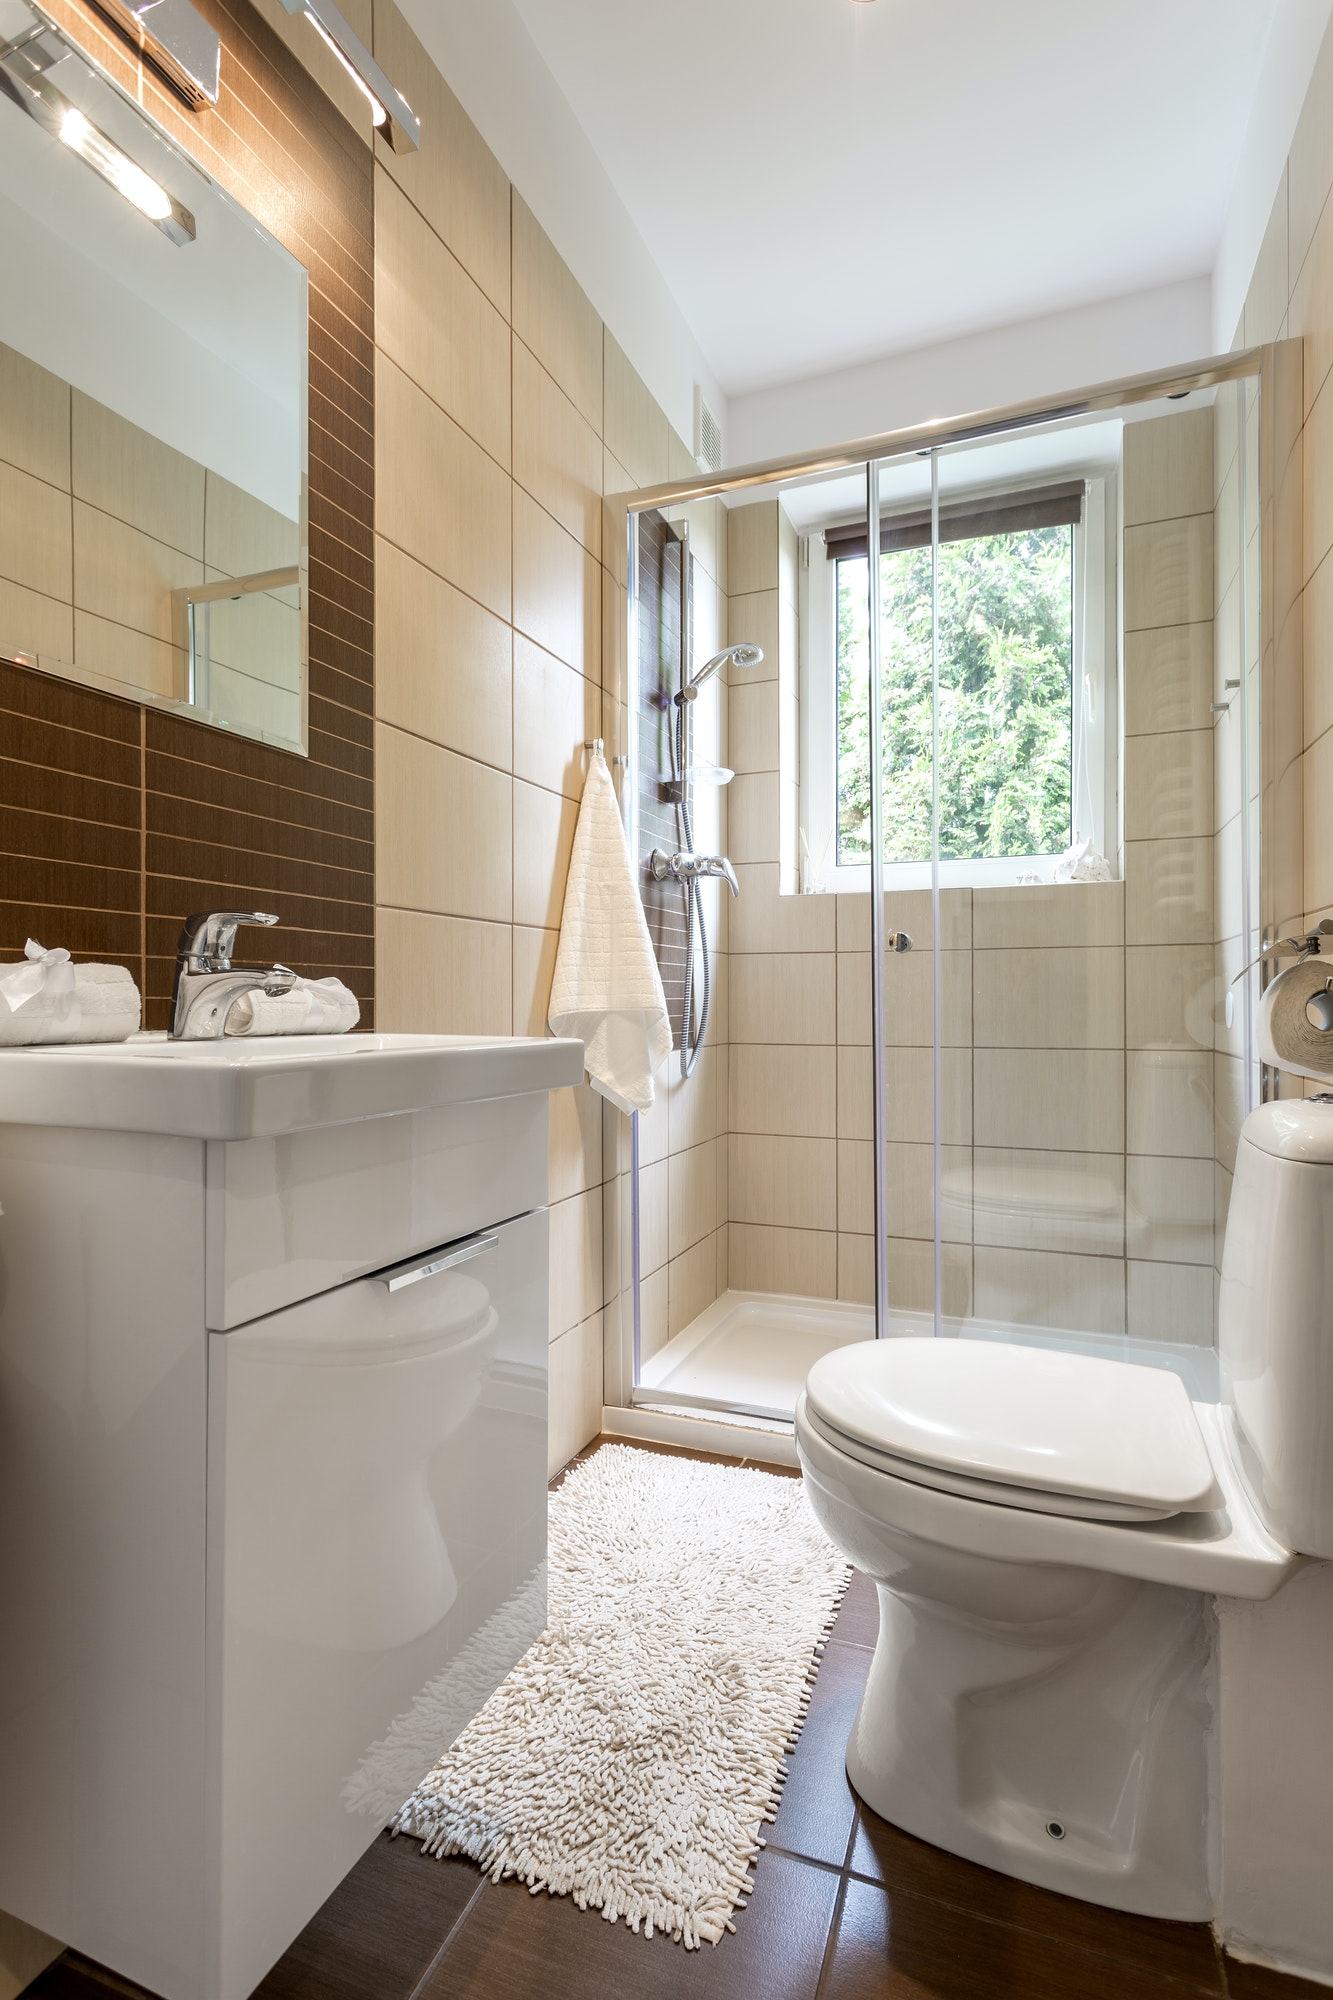 Example of a small bathroom with improvements